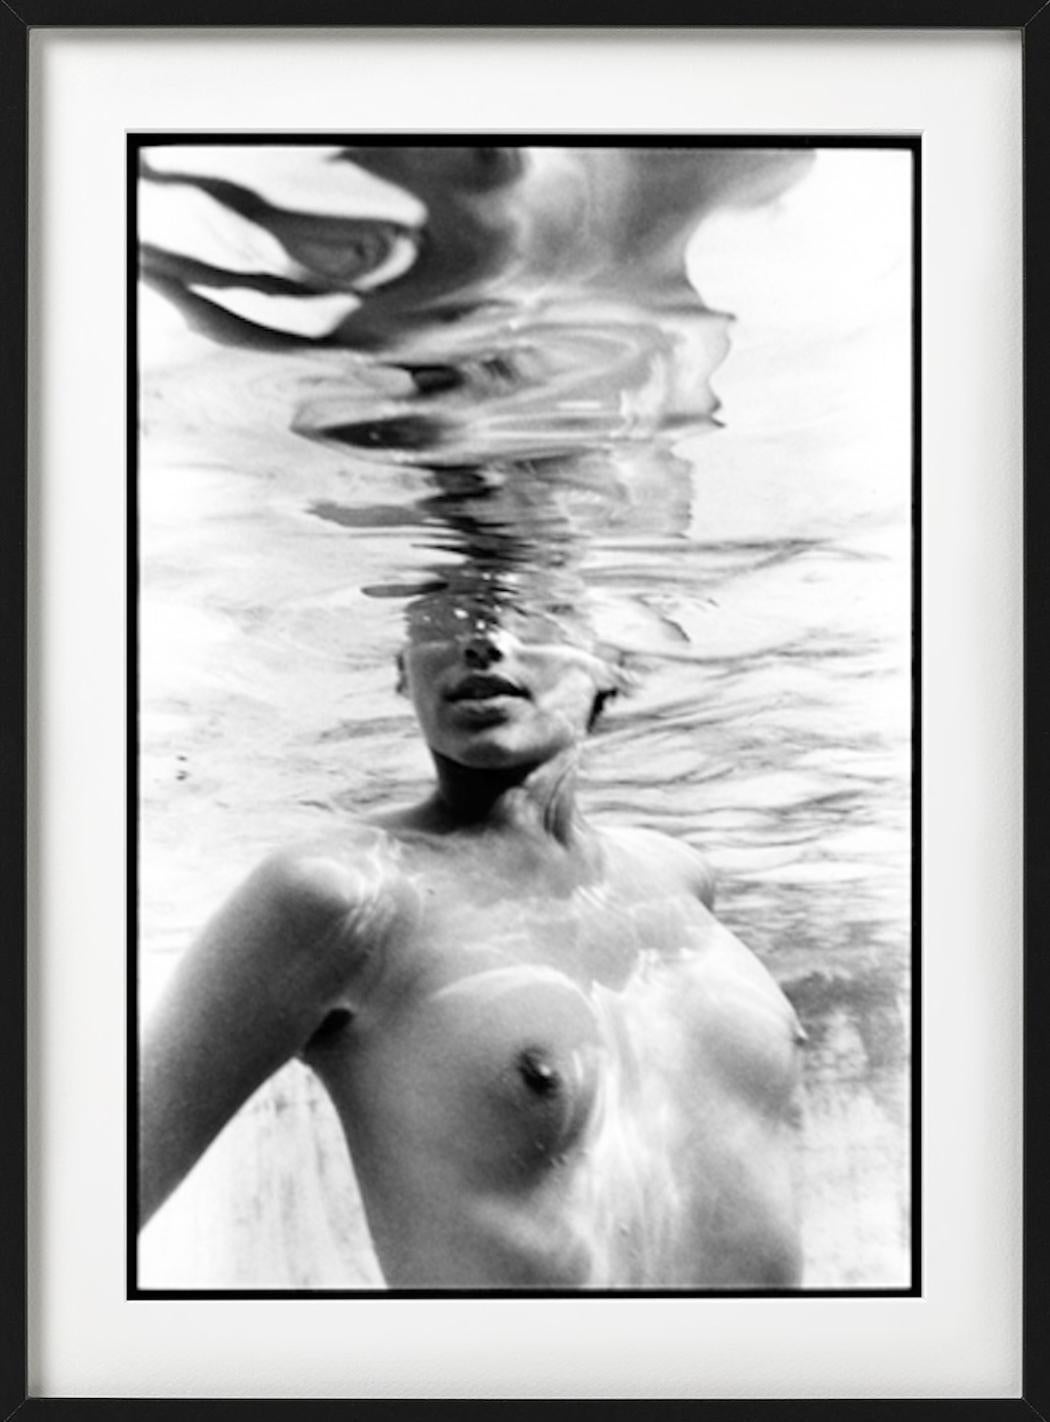 Emma Underwater - Nude Model Underwater black-and-white photography - Photograph by Arthur Elgort